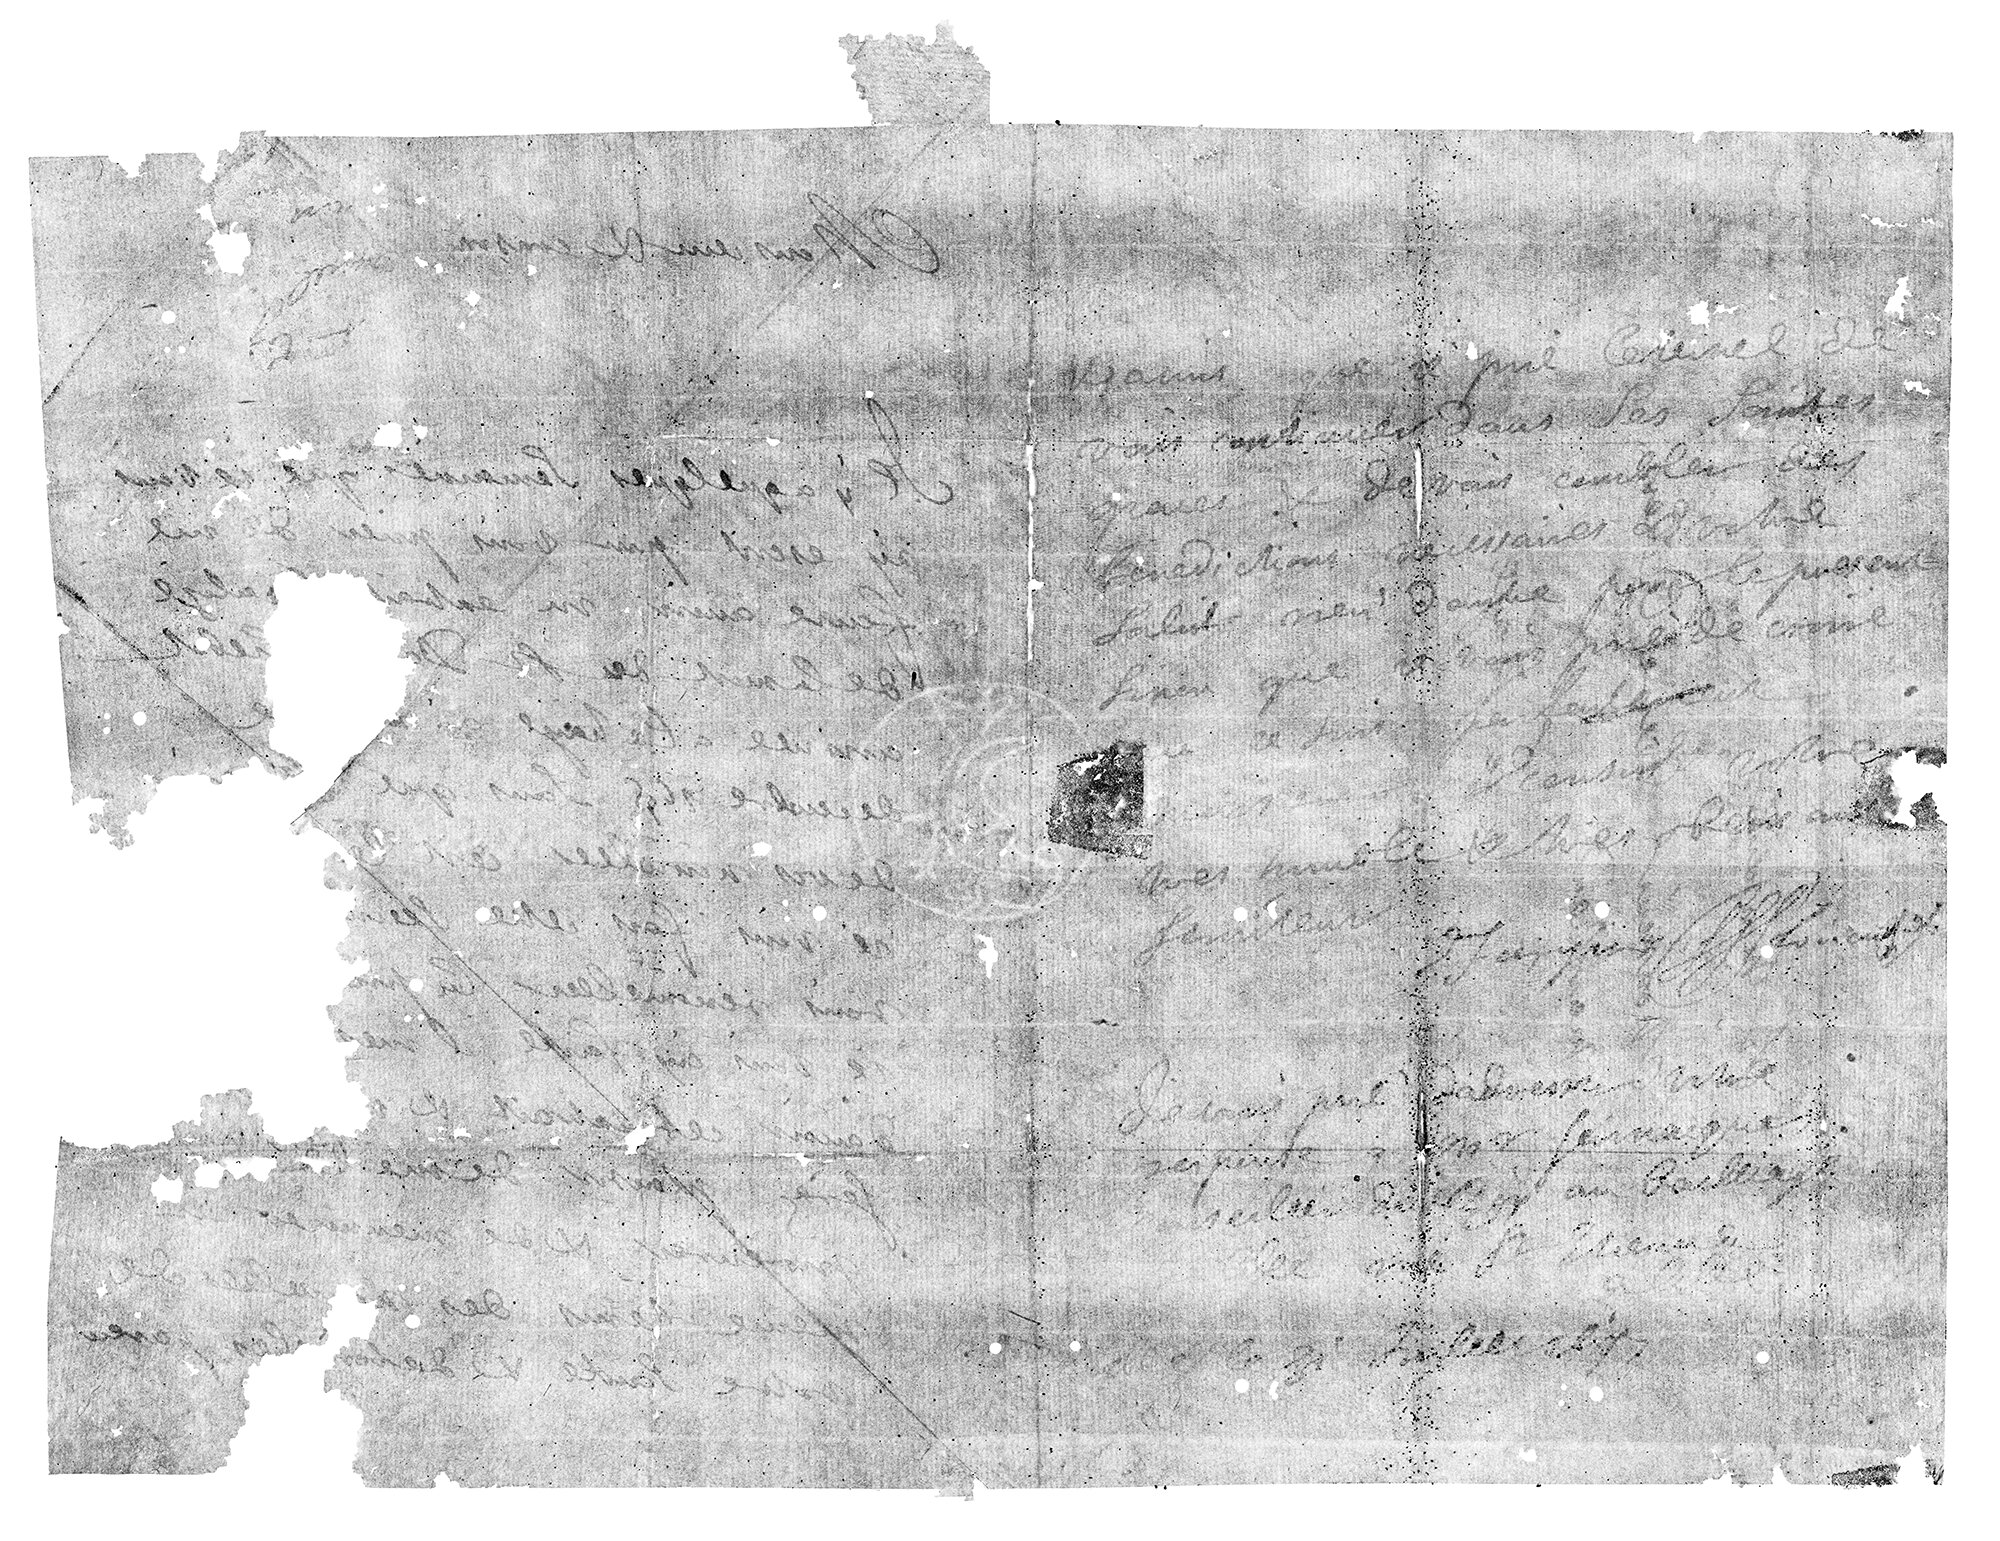 Secrets of sealed 17th century letters revealed by dental X-ray scanners